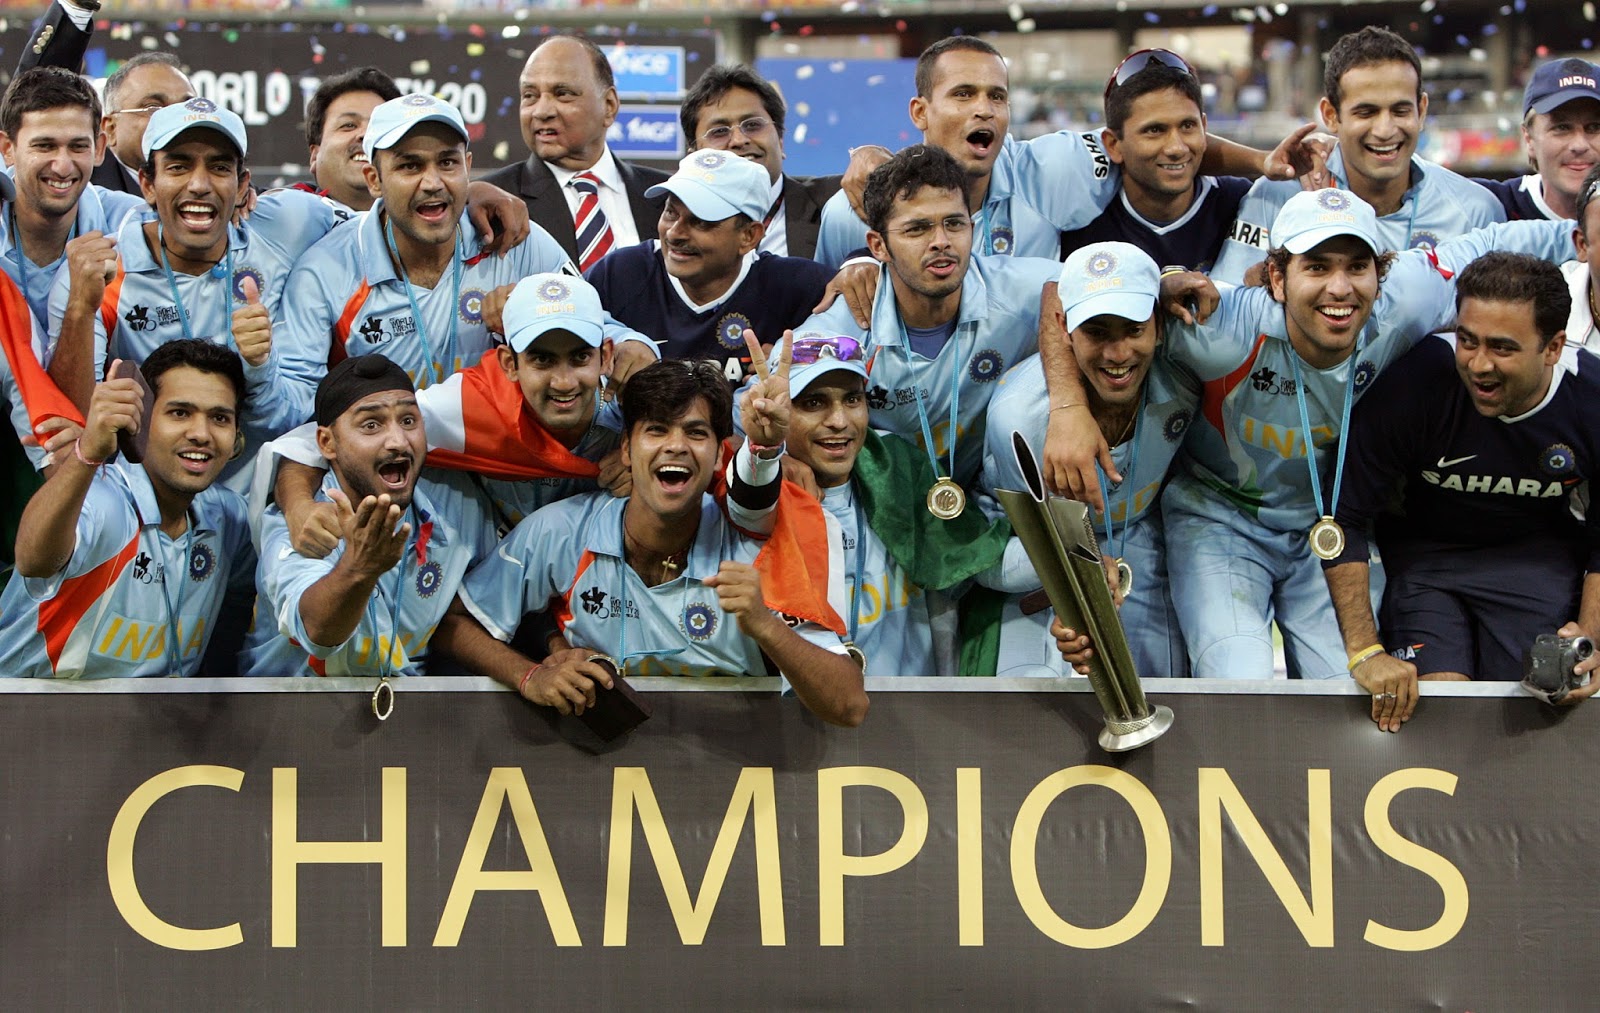 Icc Twenty20 World Cup 2007 To 2014 Images Archival Store